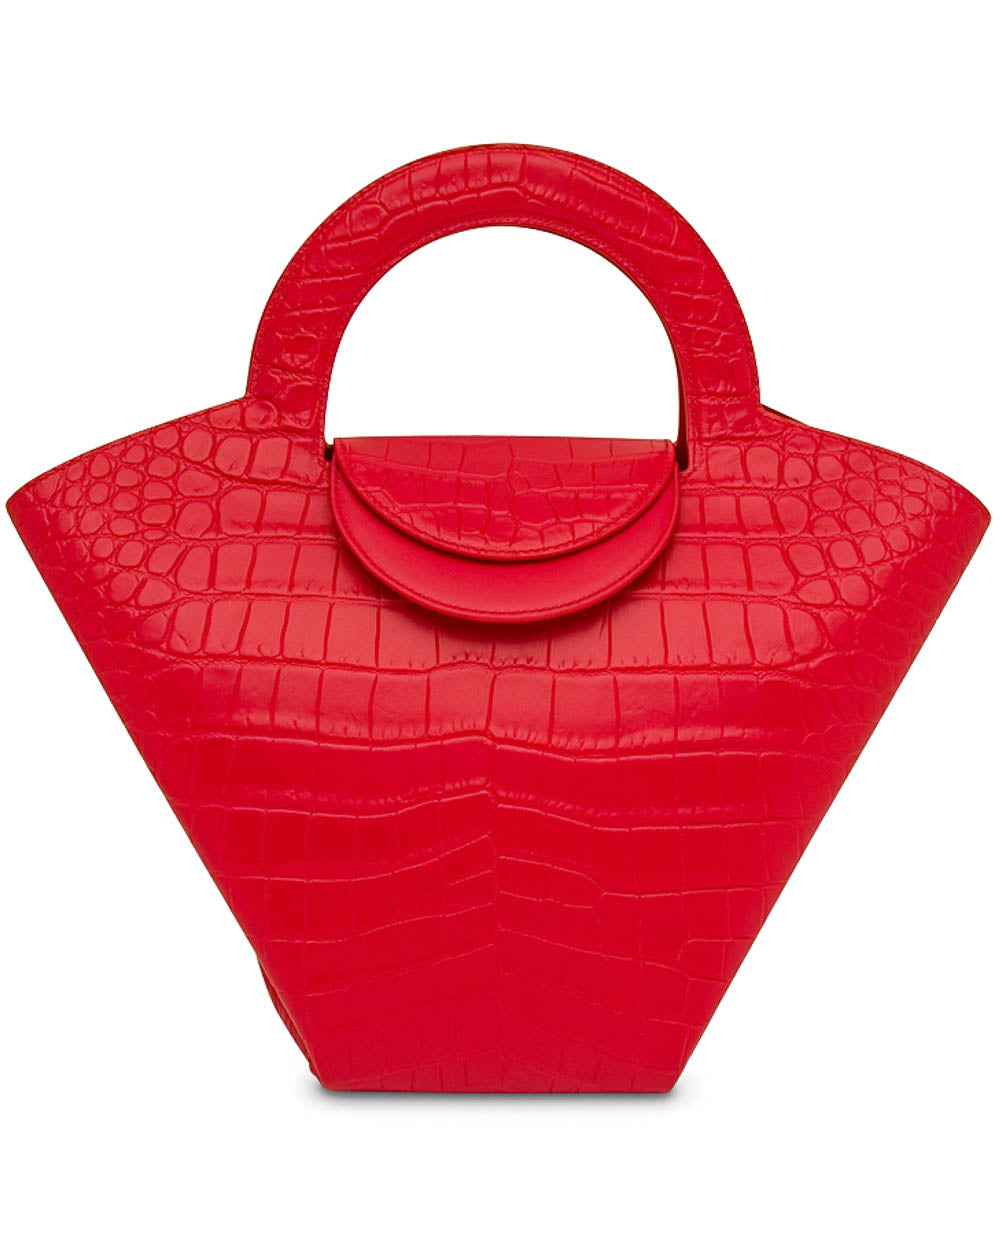 Doll Tote in Bright Red